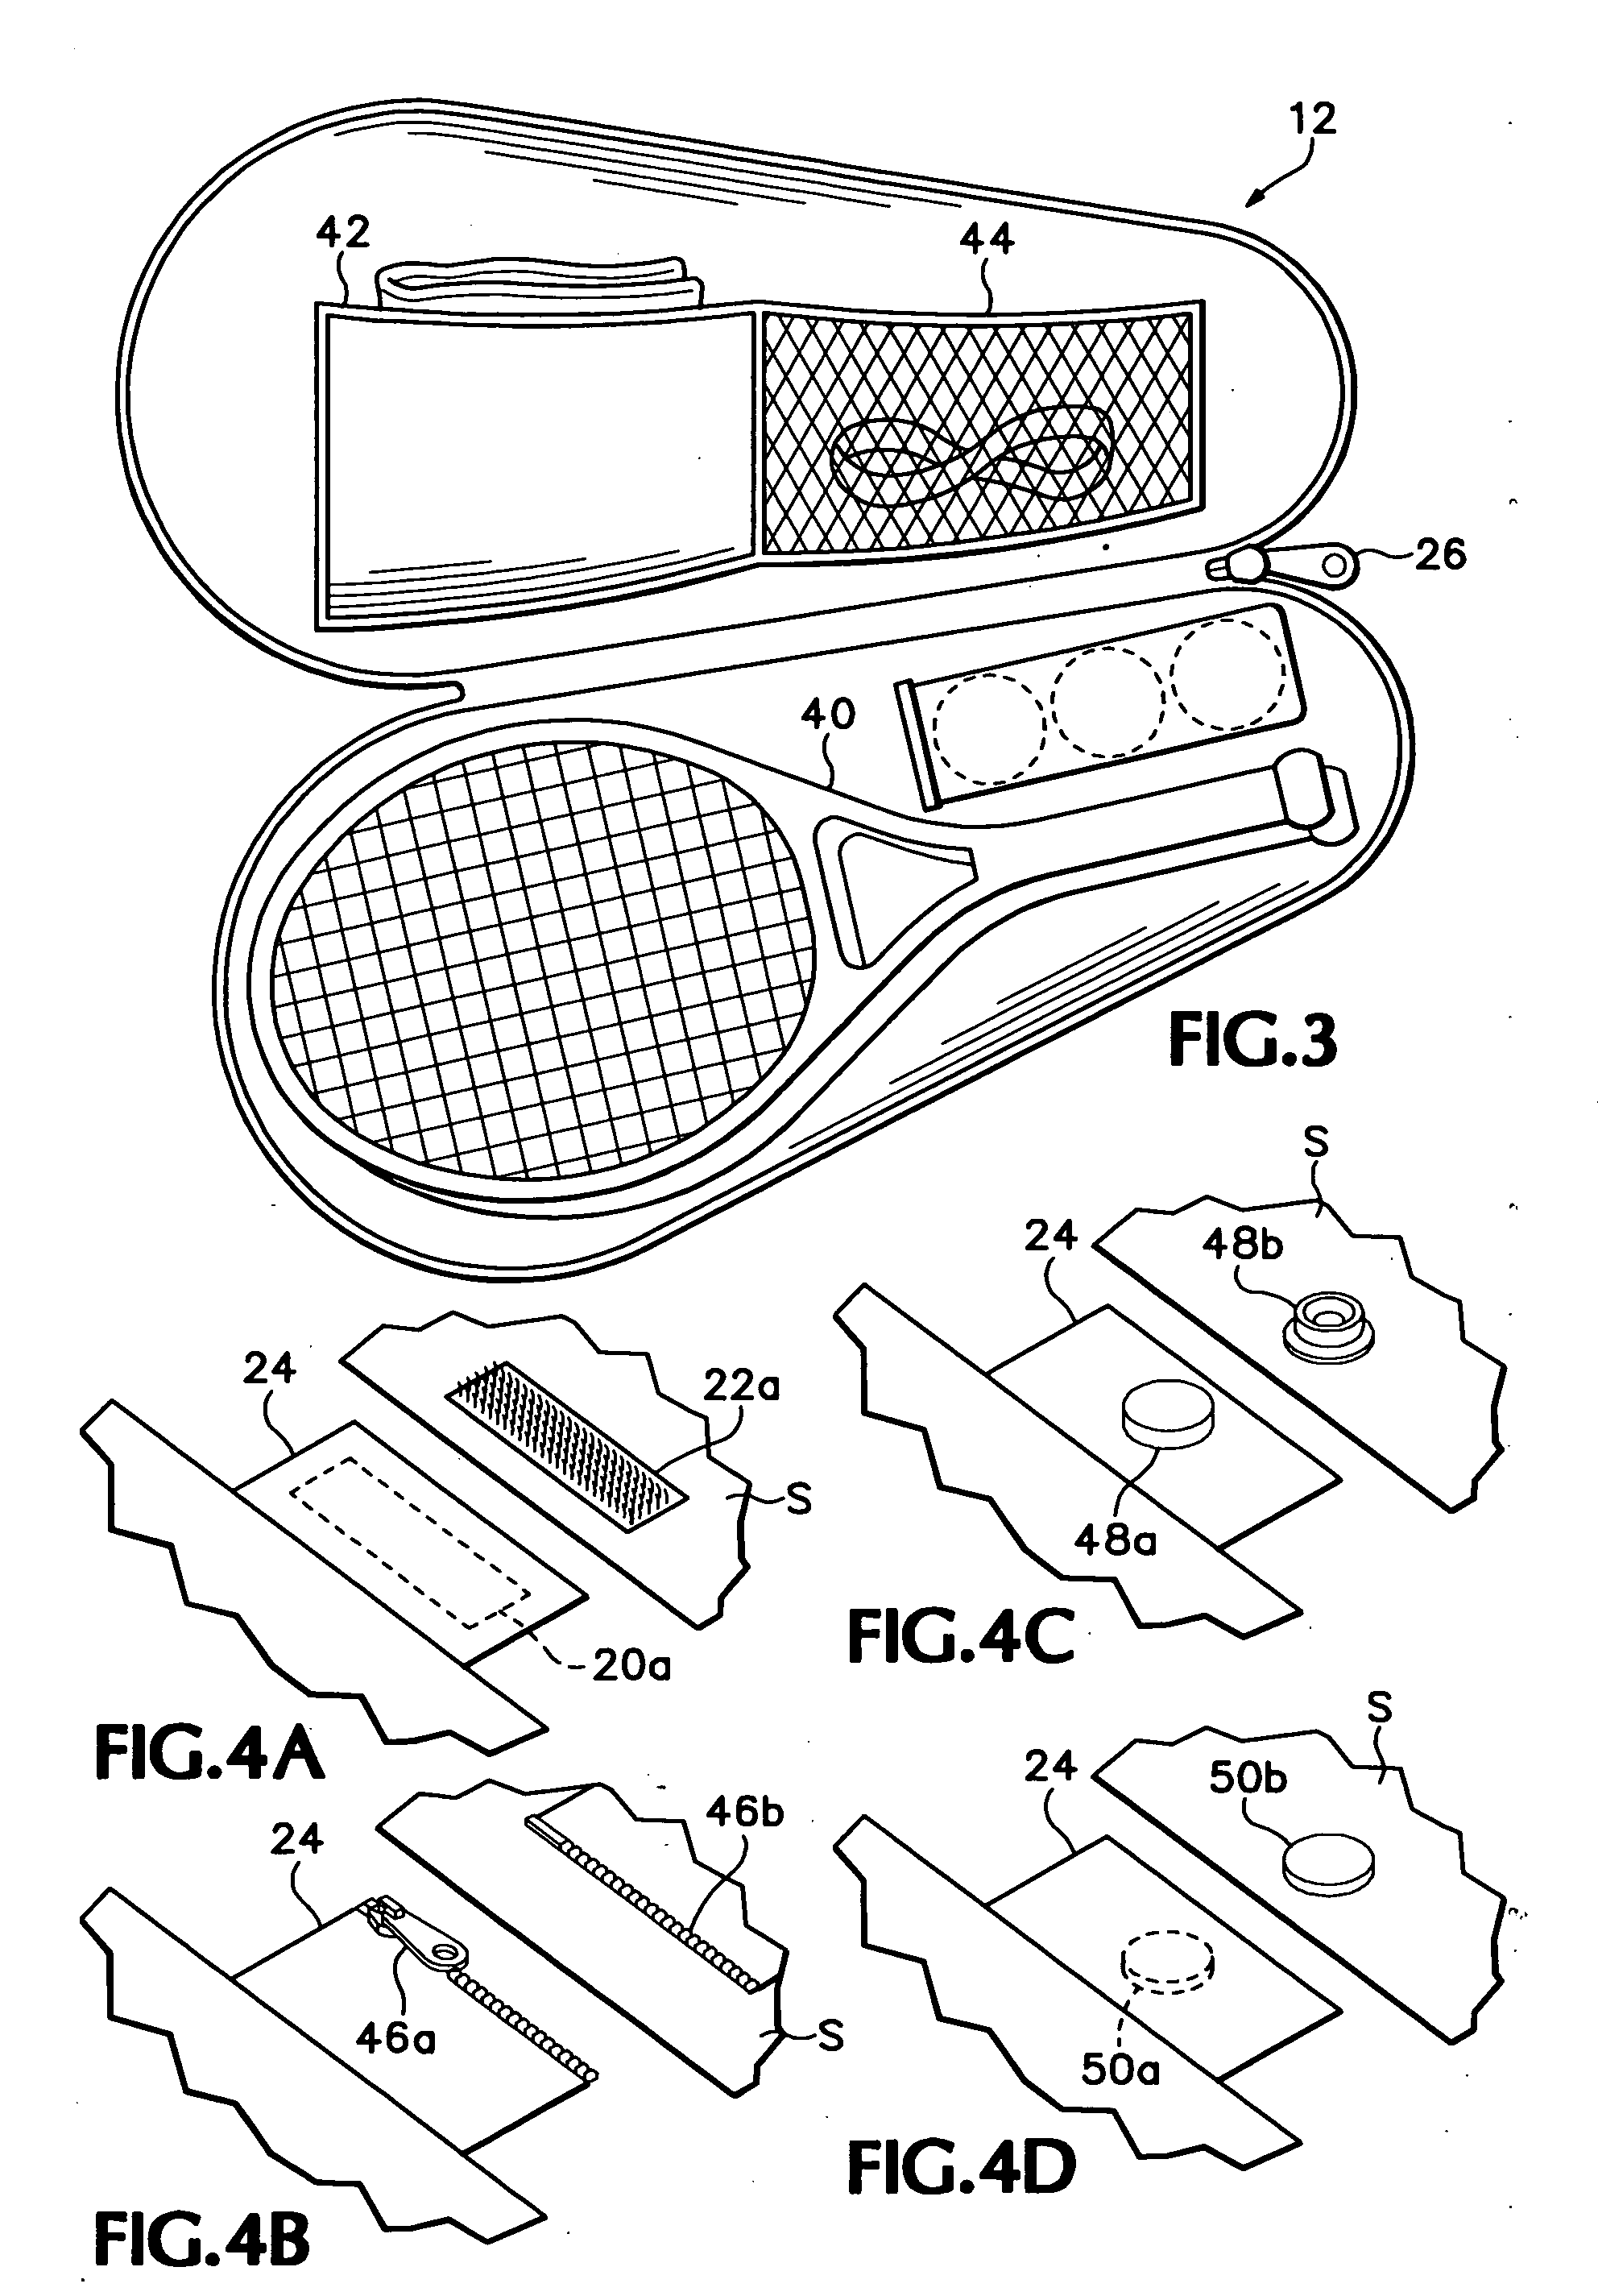 Modular racquet and gear tote bag device